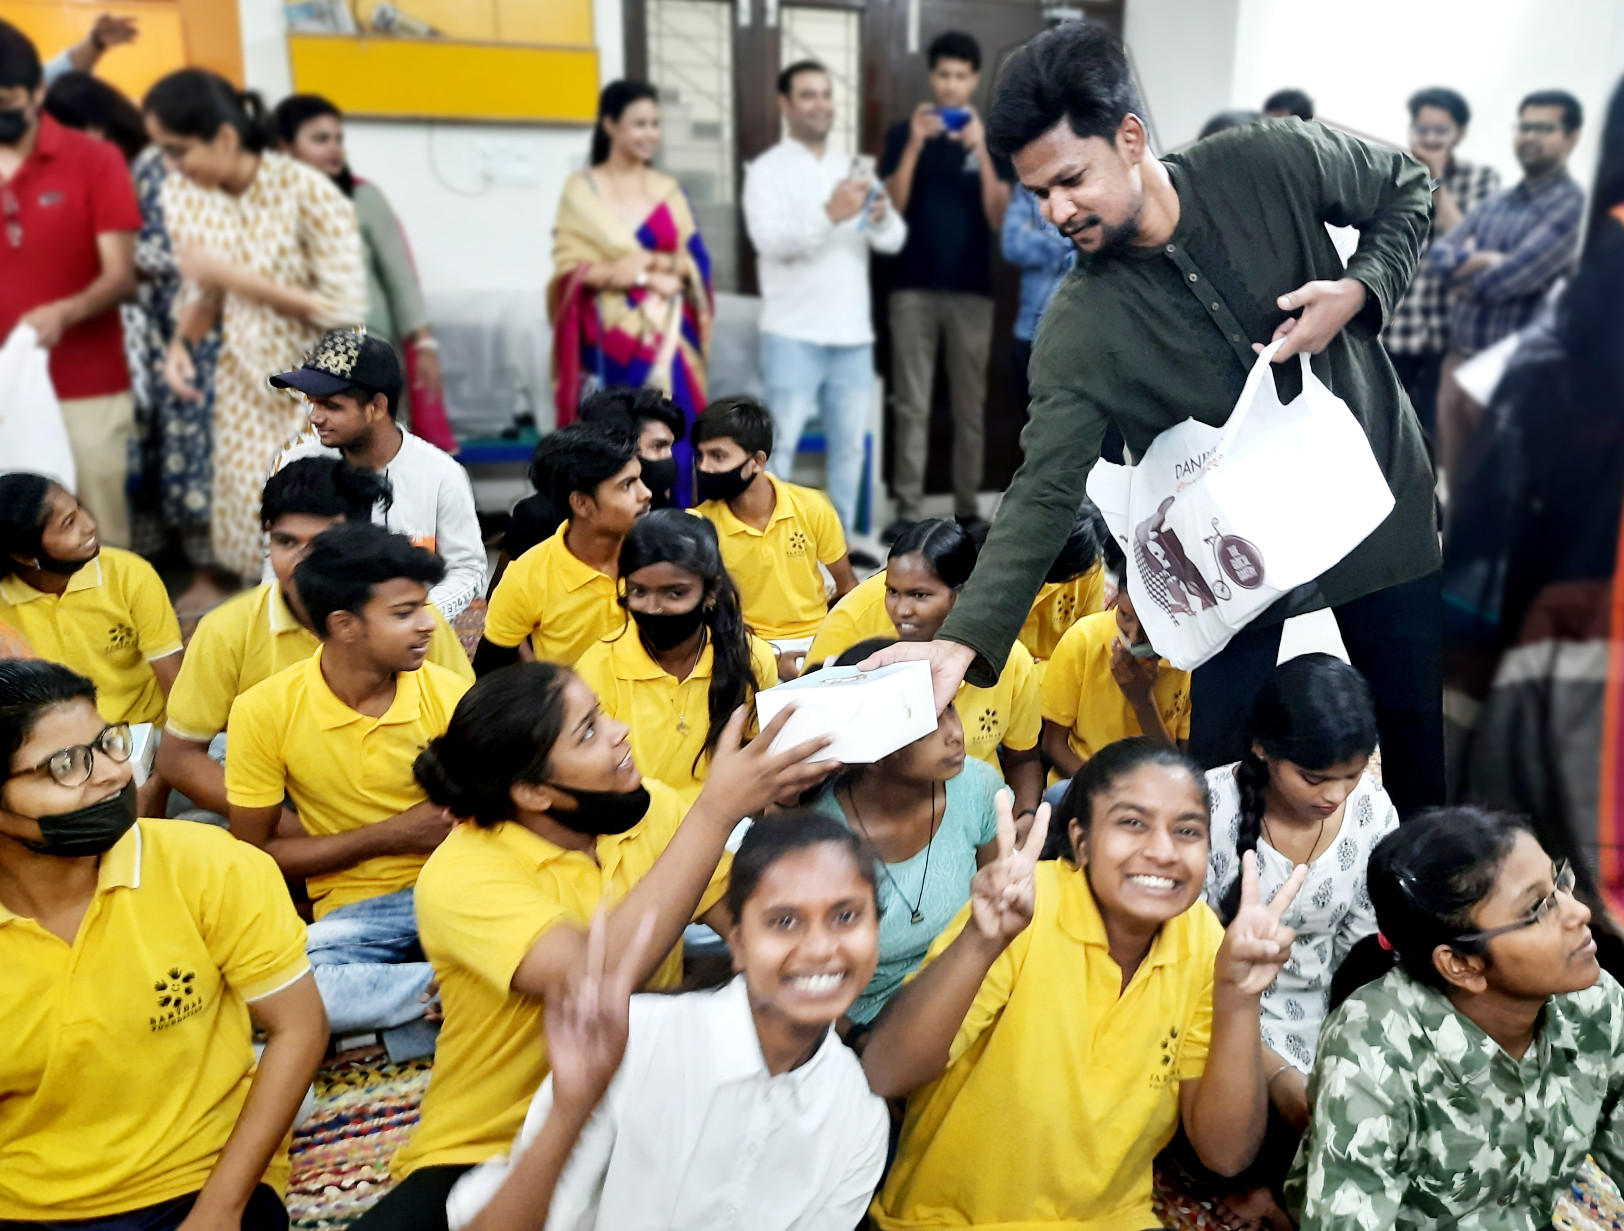 Pankaj distributed food packets and the children relished the treats